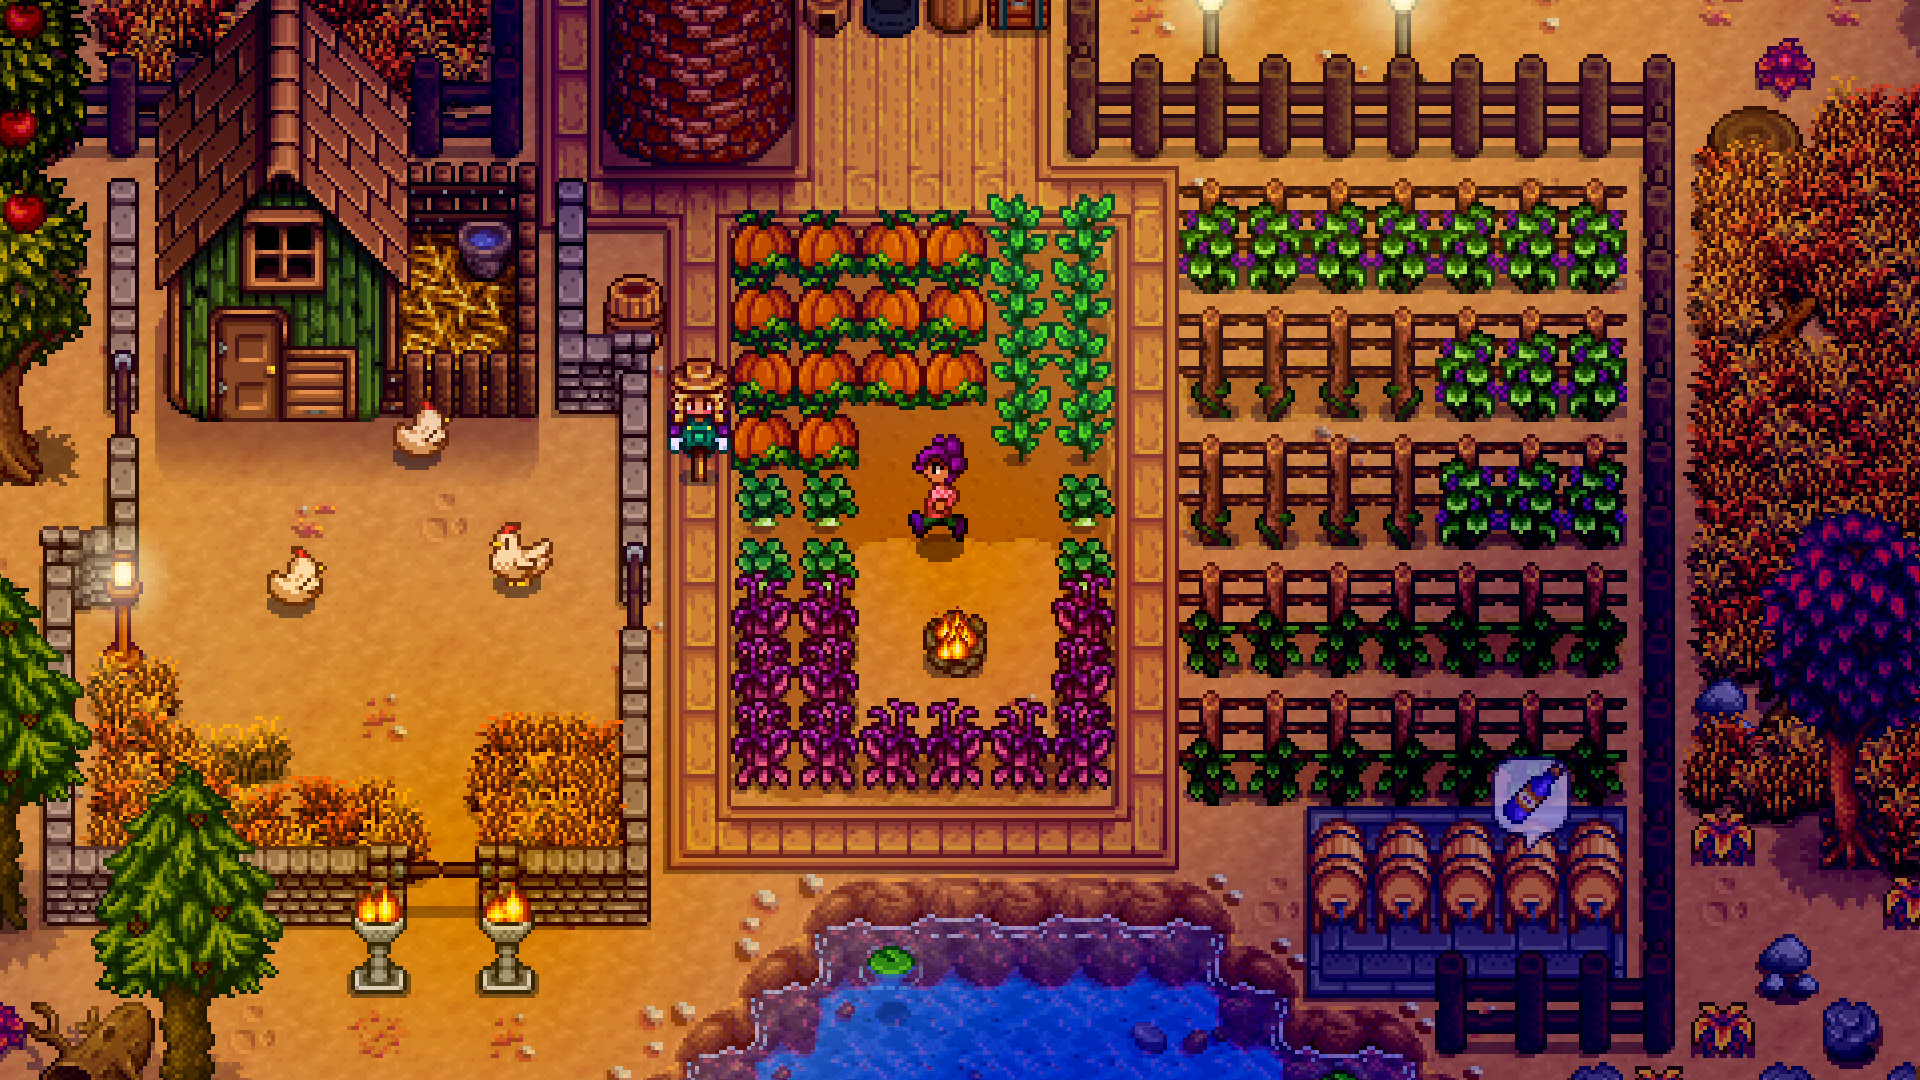 How to get the Meowmere sword in Stardew Valley